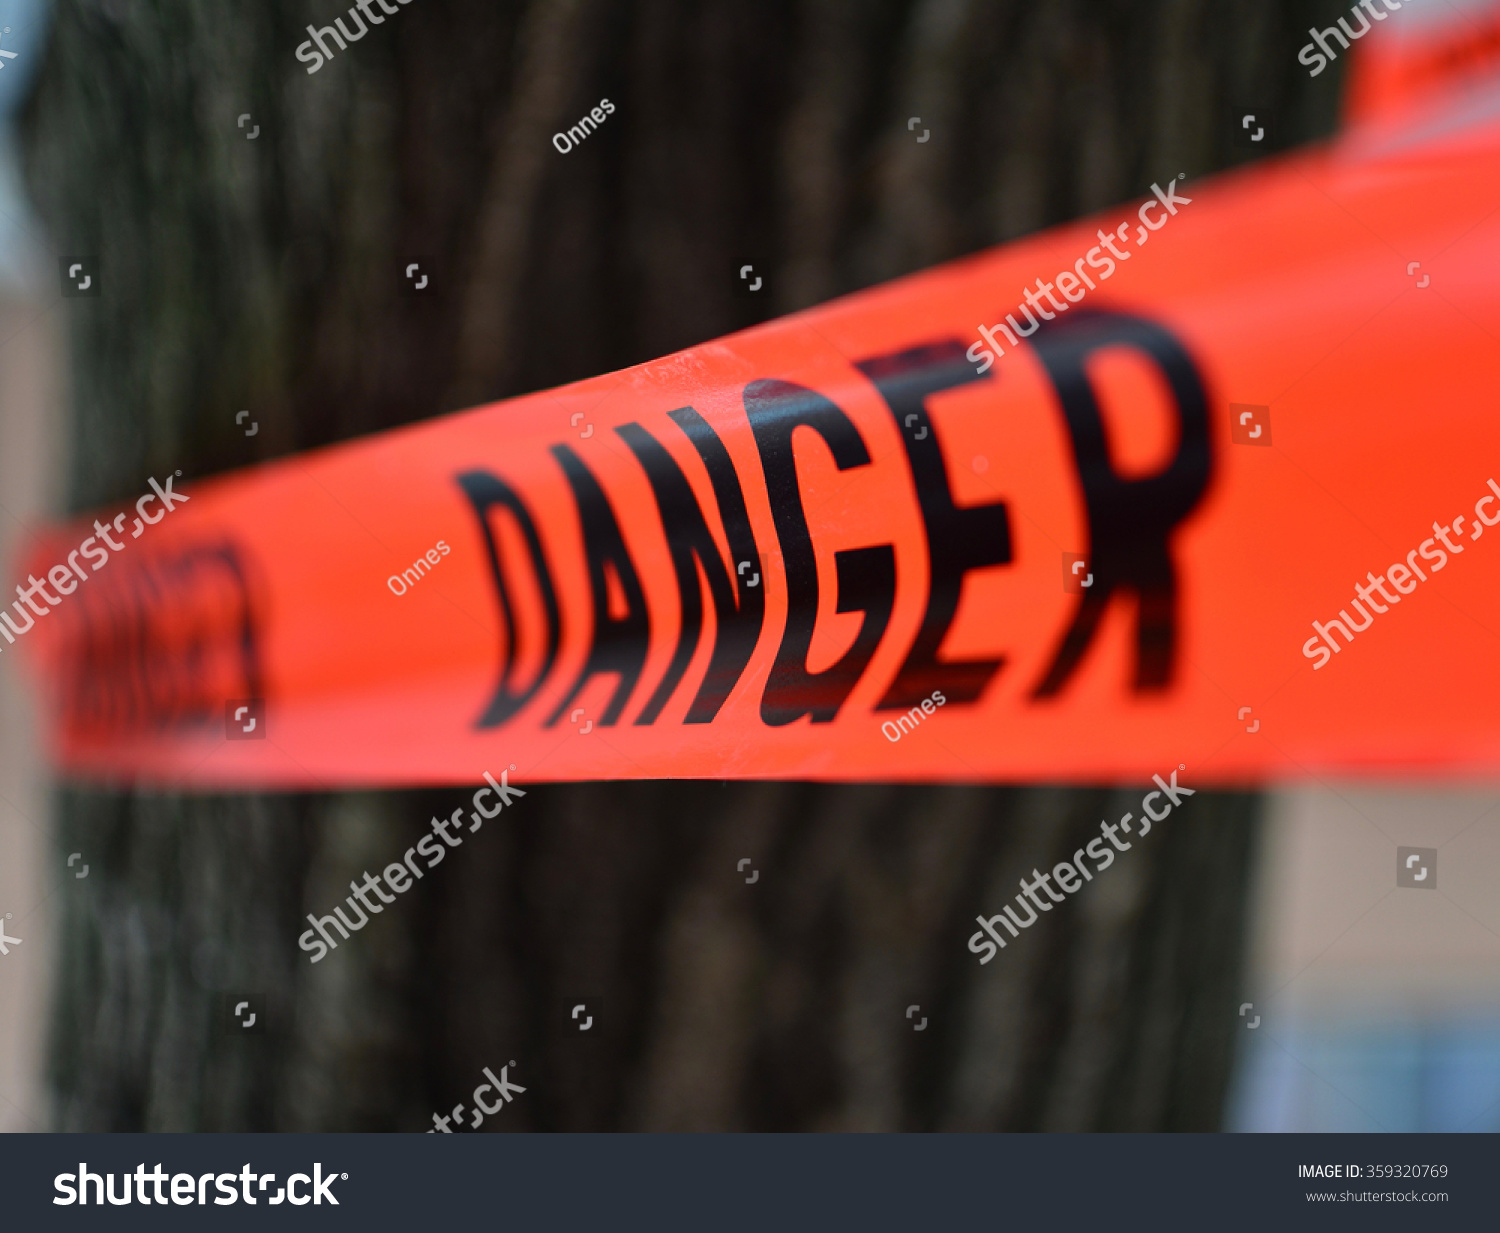 Danger Red Tape Warning in front of a tree/ Red Danger sign Tape #359320769